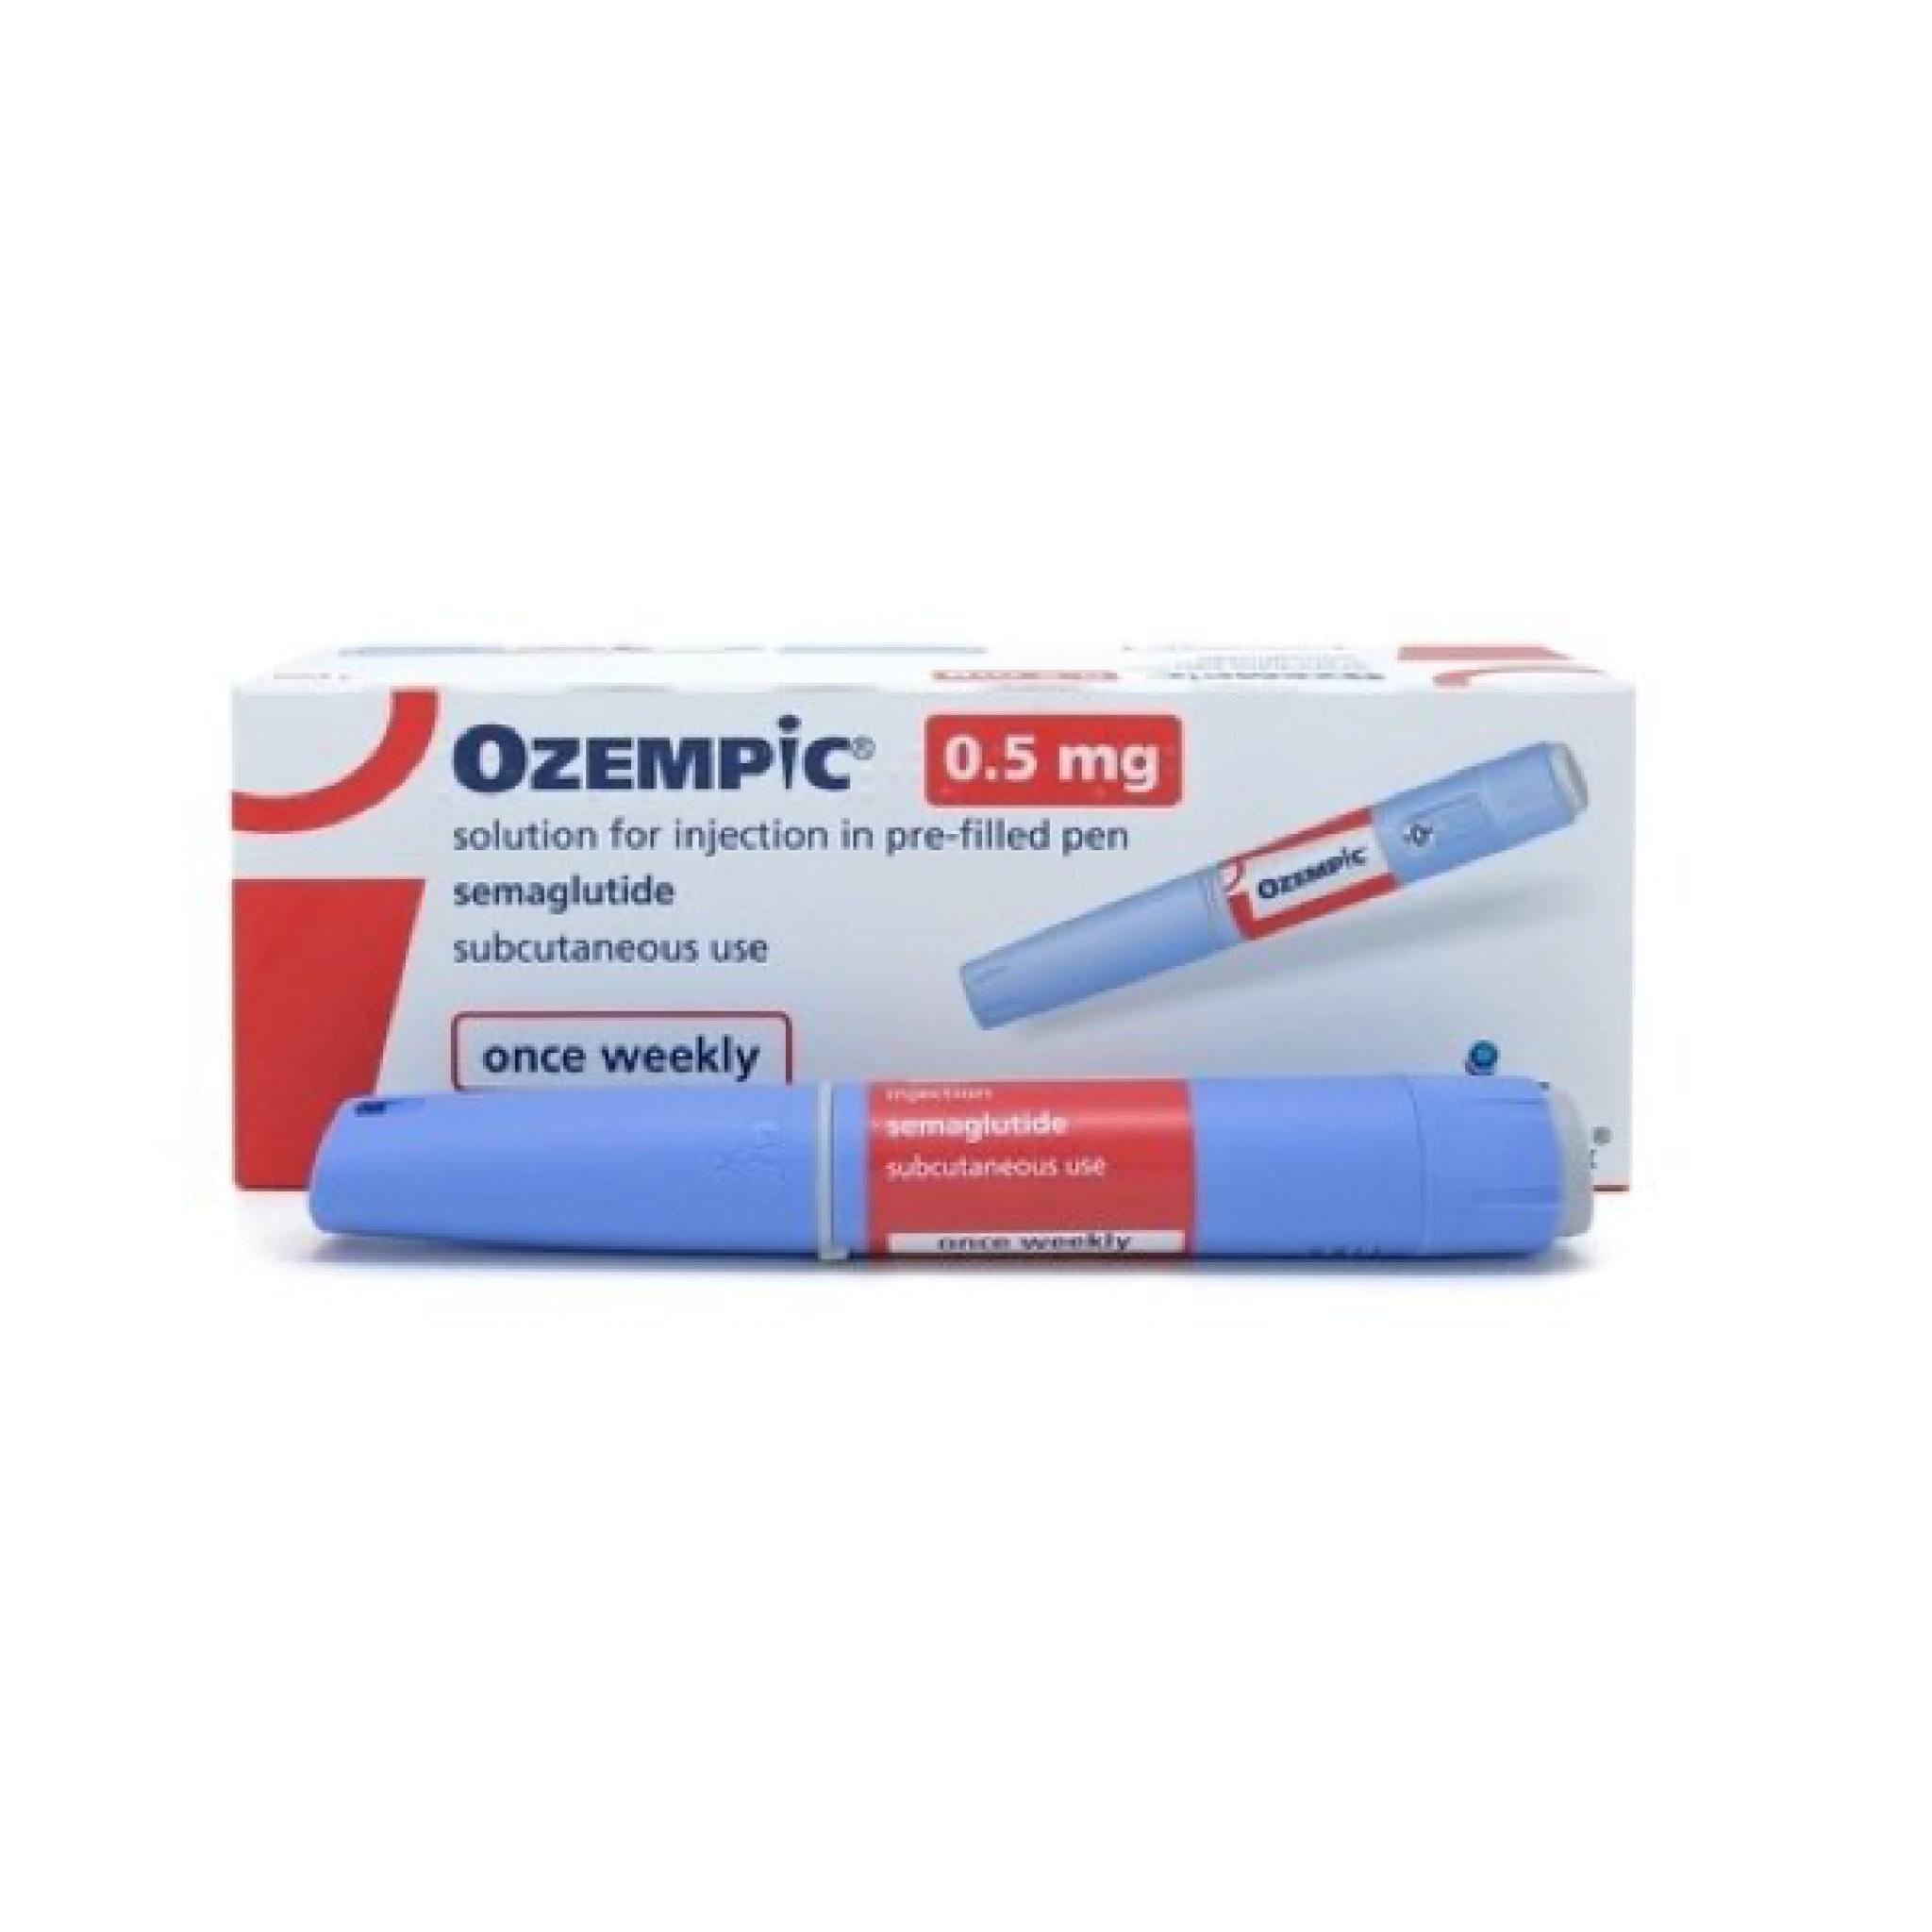 is-ozempic-available-in-australia